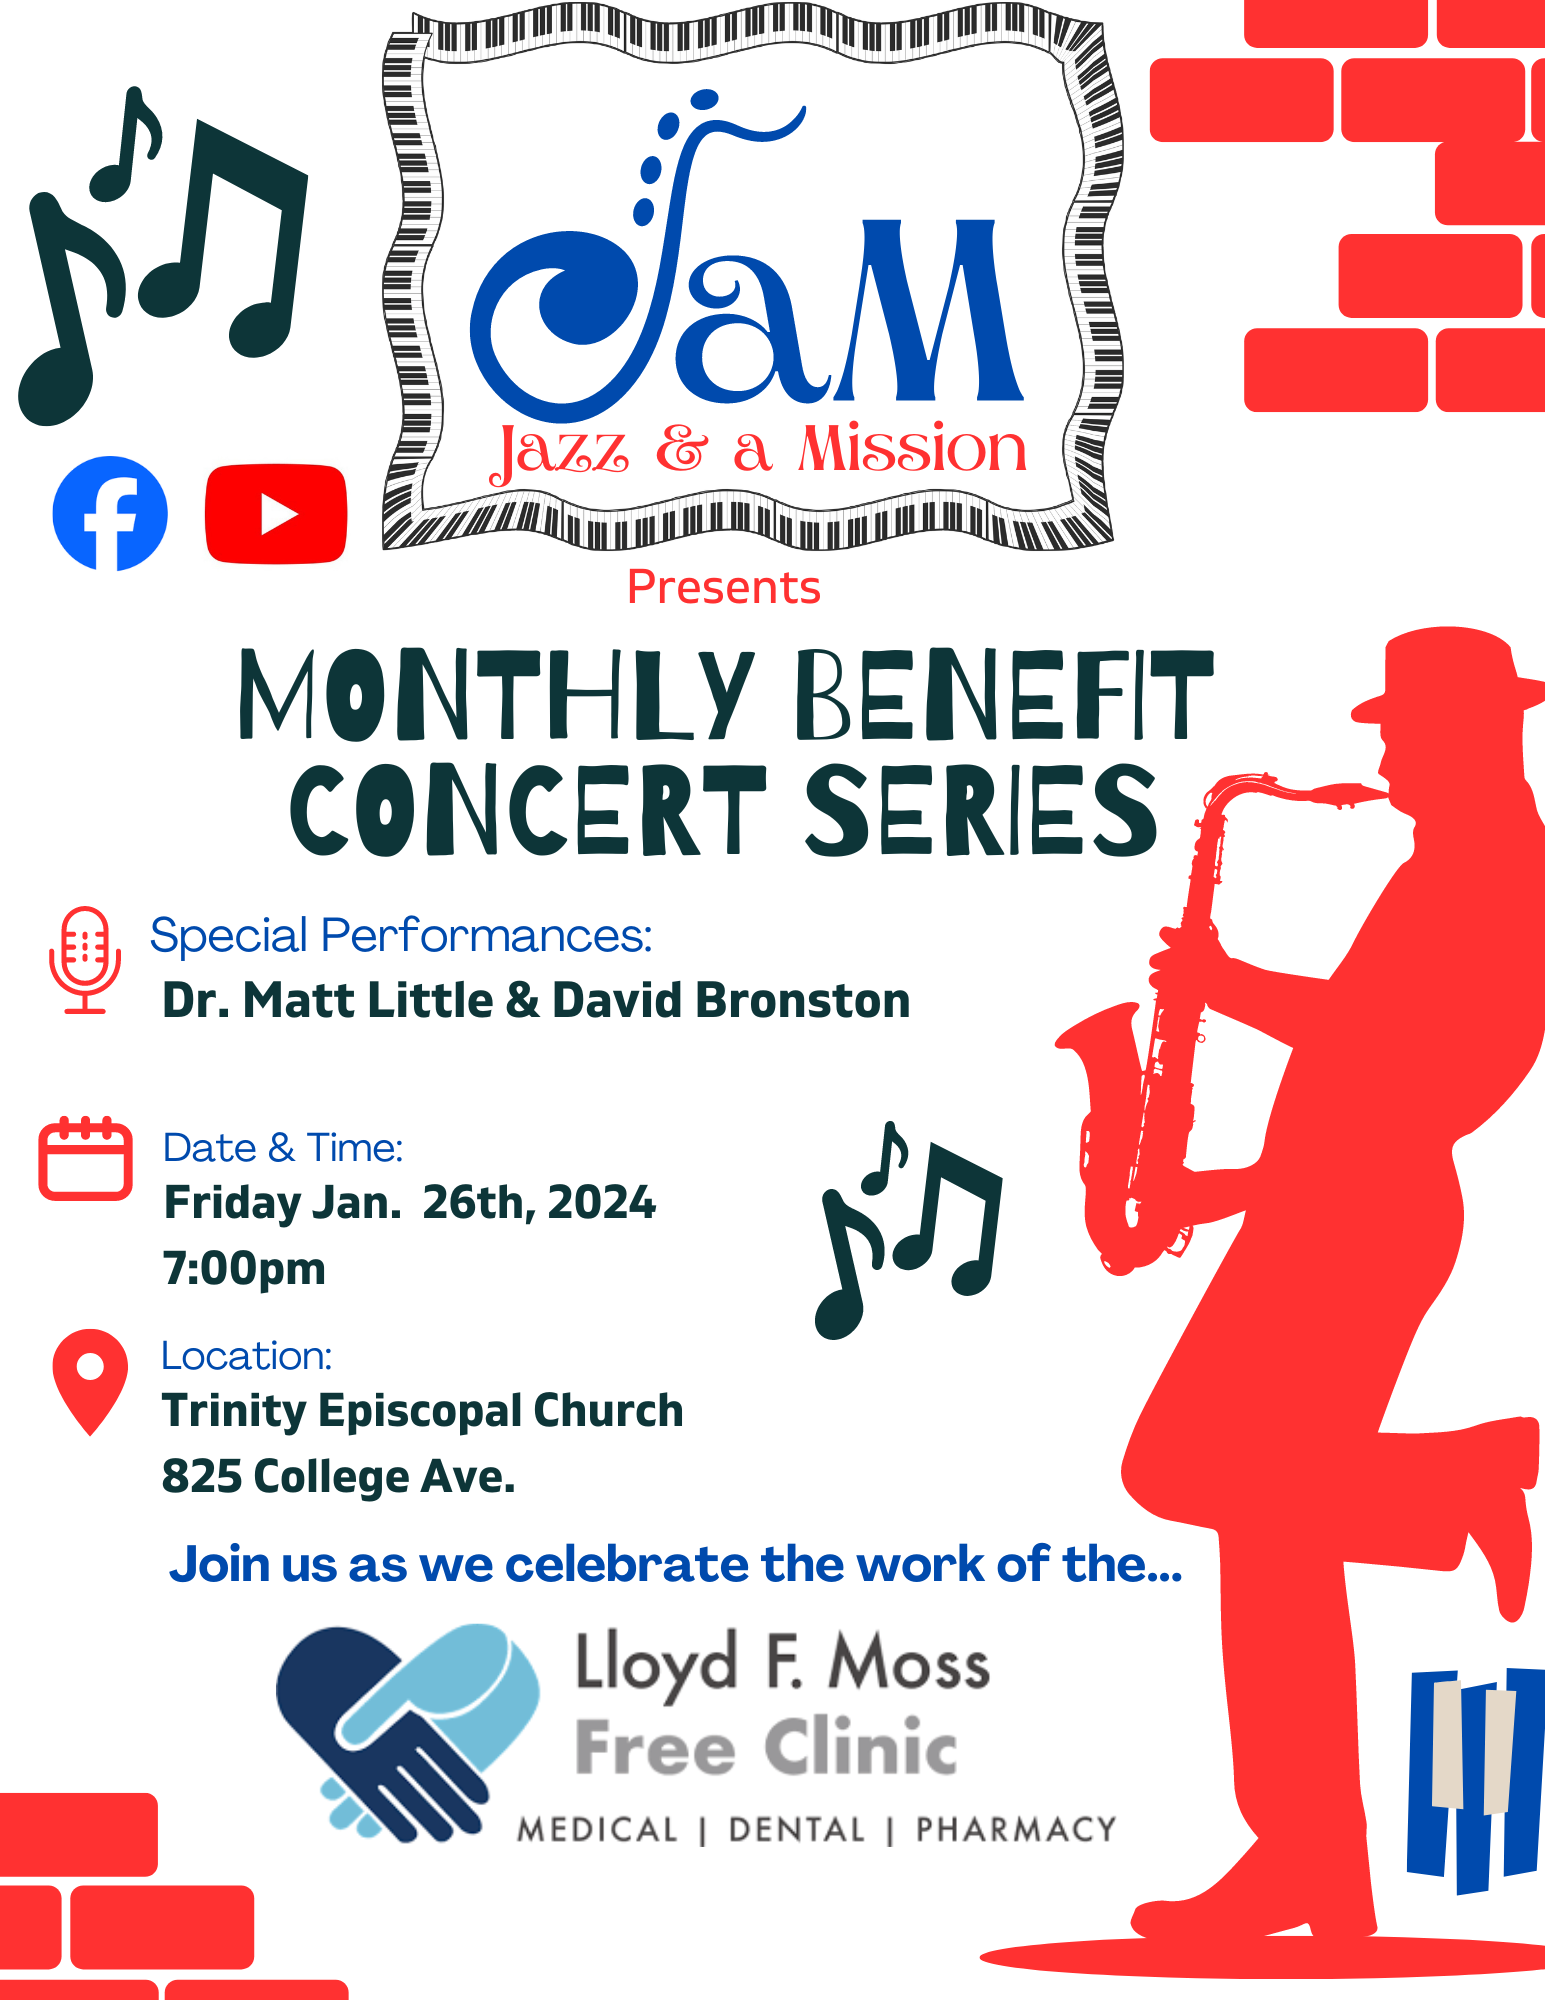 flyer for JAM concert series benefitting the Moss Free Clinic